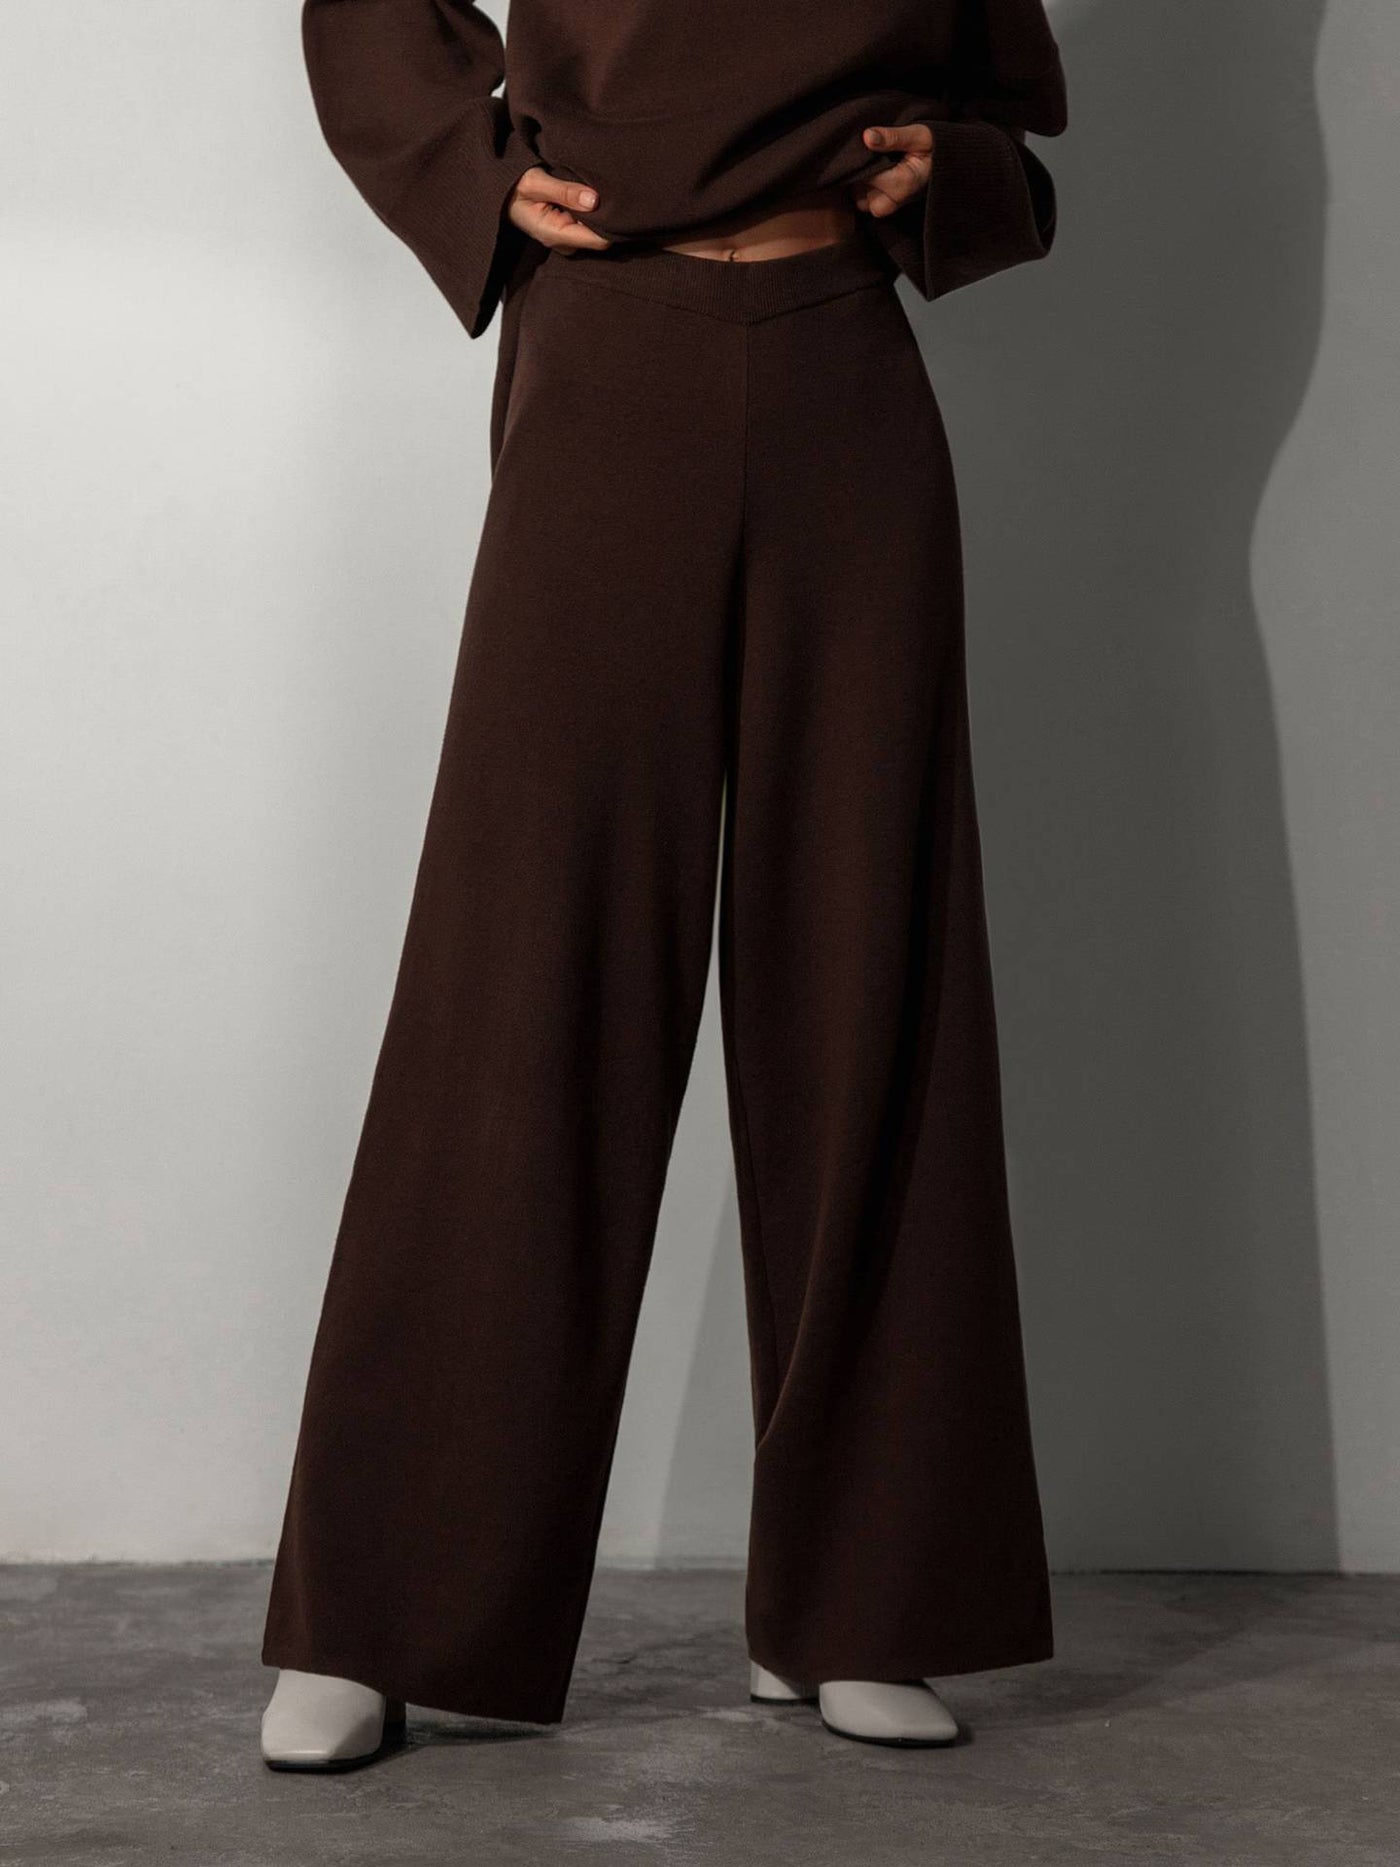 Refined Relaxation Asymmetrical Knitted Top & Bottoms Set